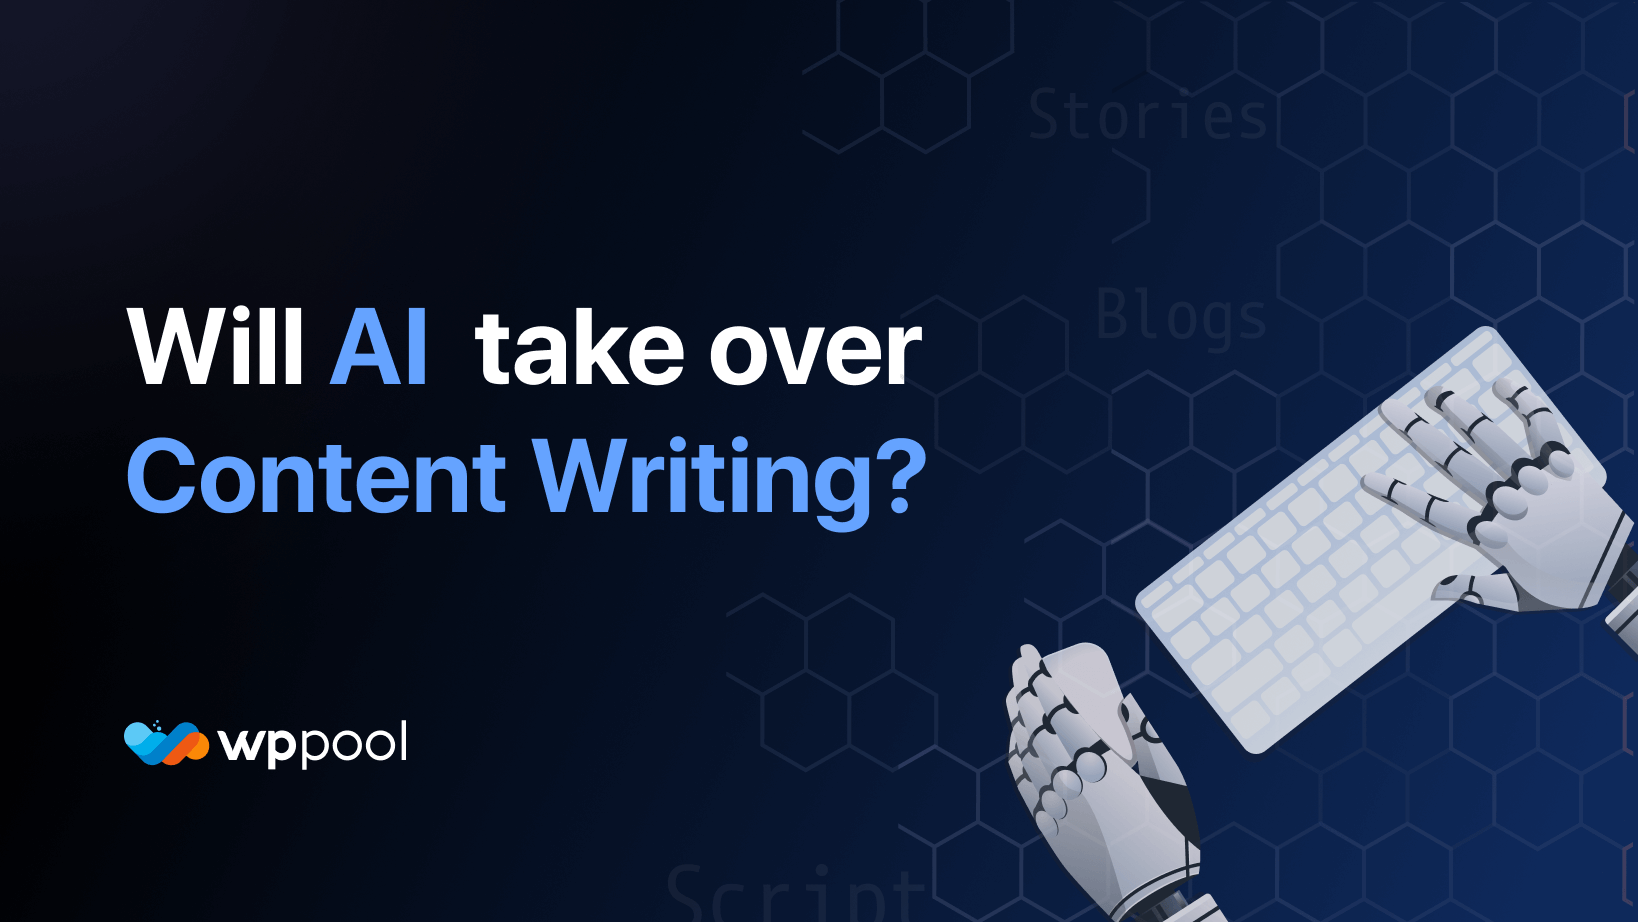 Will AI take over content writing? Impact of GPT-3 AI chat